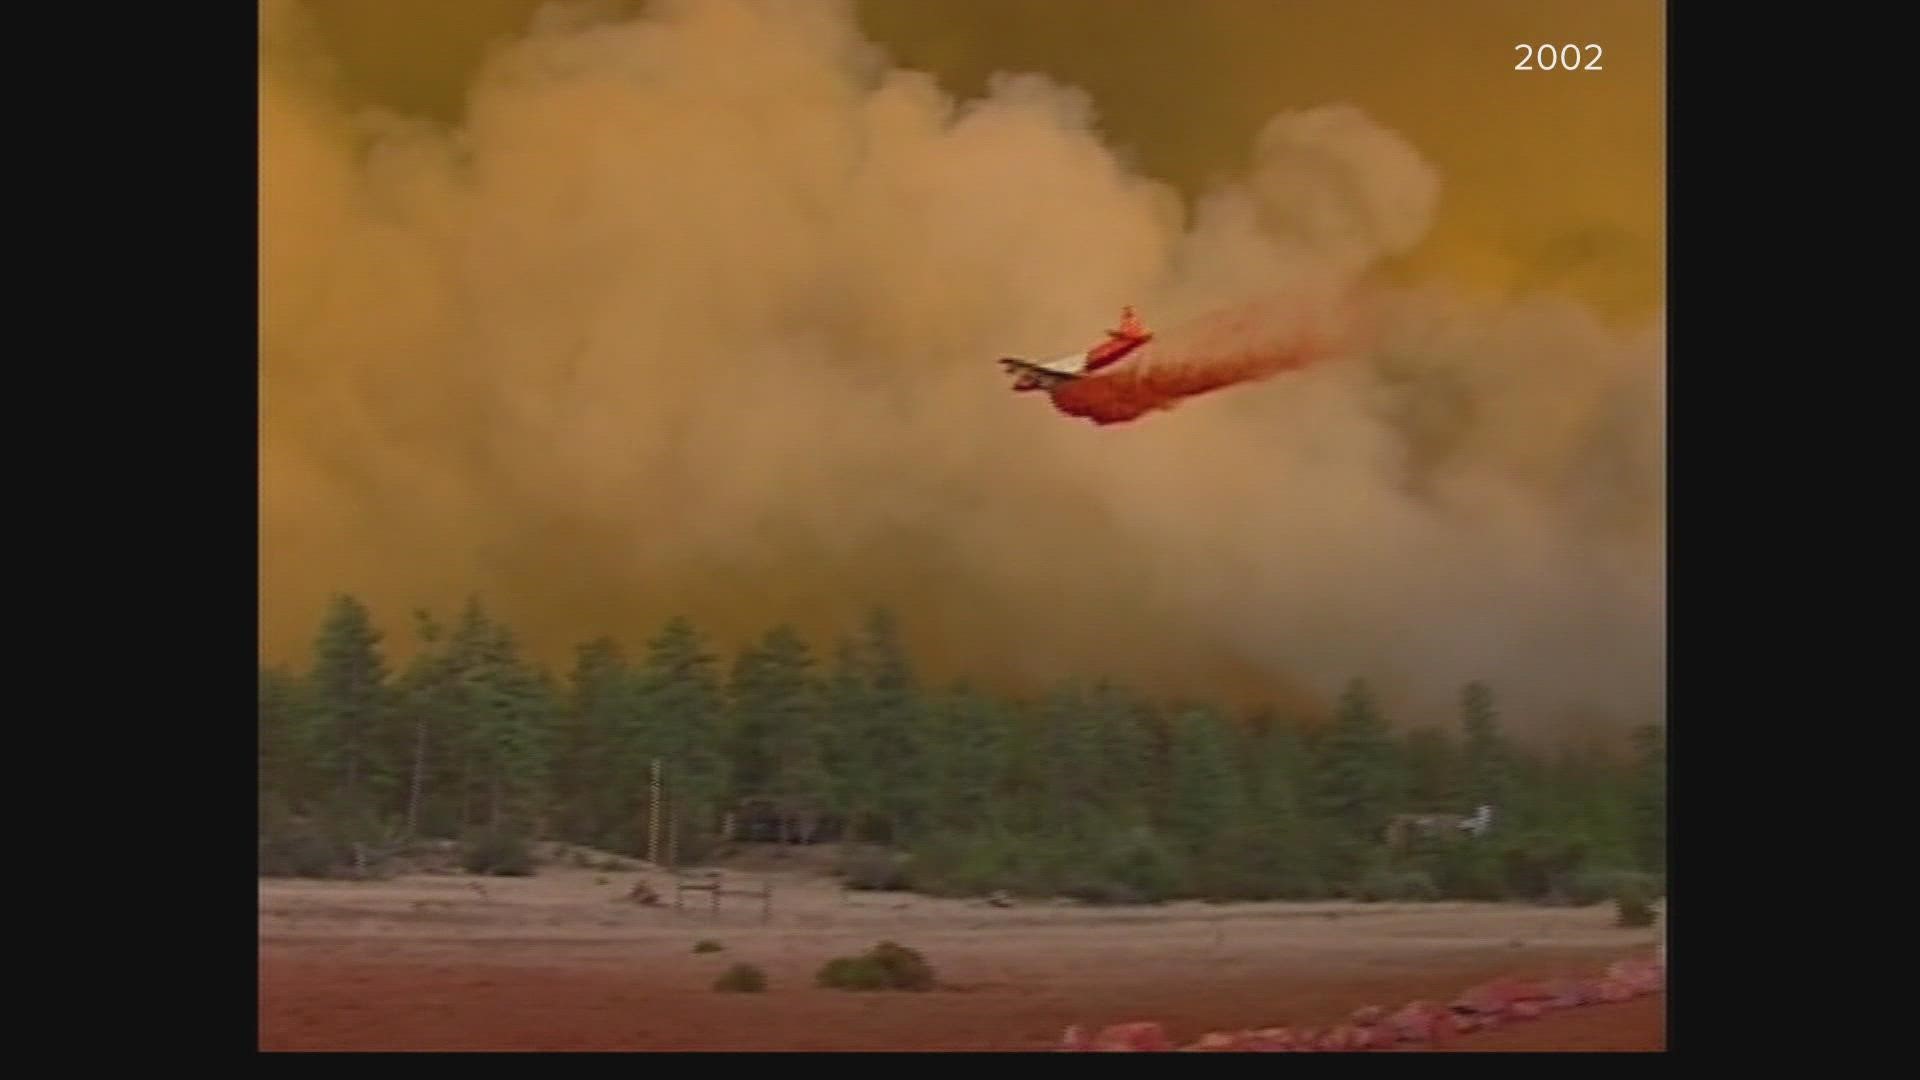 A look back at the devastating Rodeo-Chediski Fire and its continued impact 20 years later.